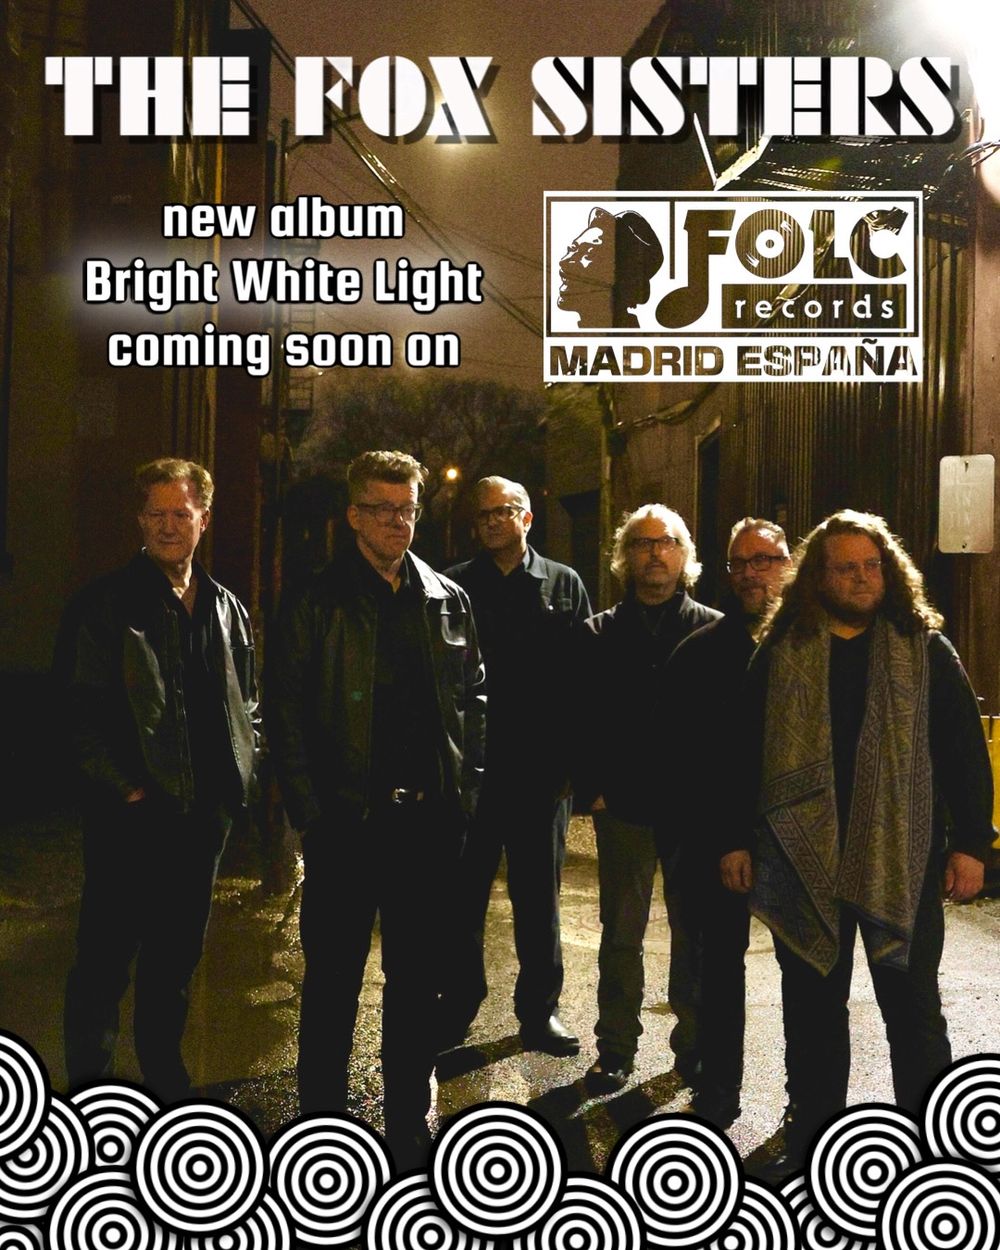 The Fox Sisters new album Bright White Light on FOLC Records (Madrid, Spain) coming in spring 2023. 